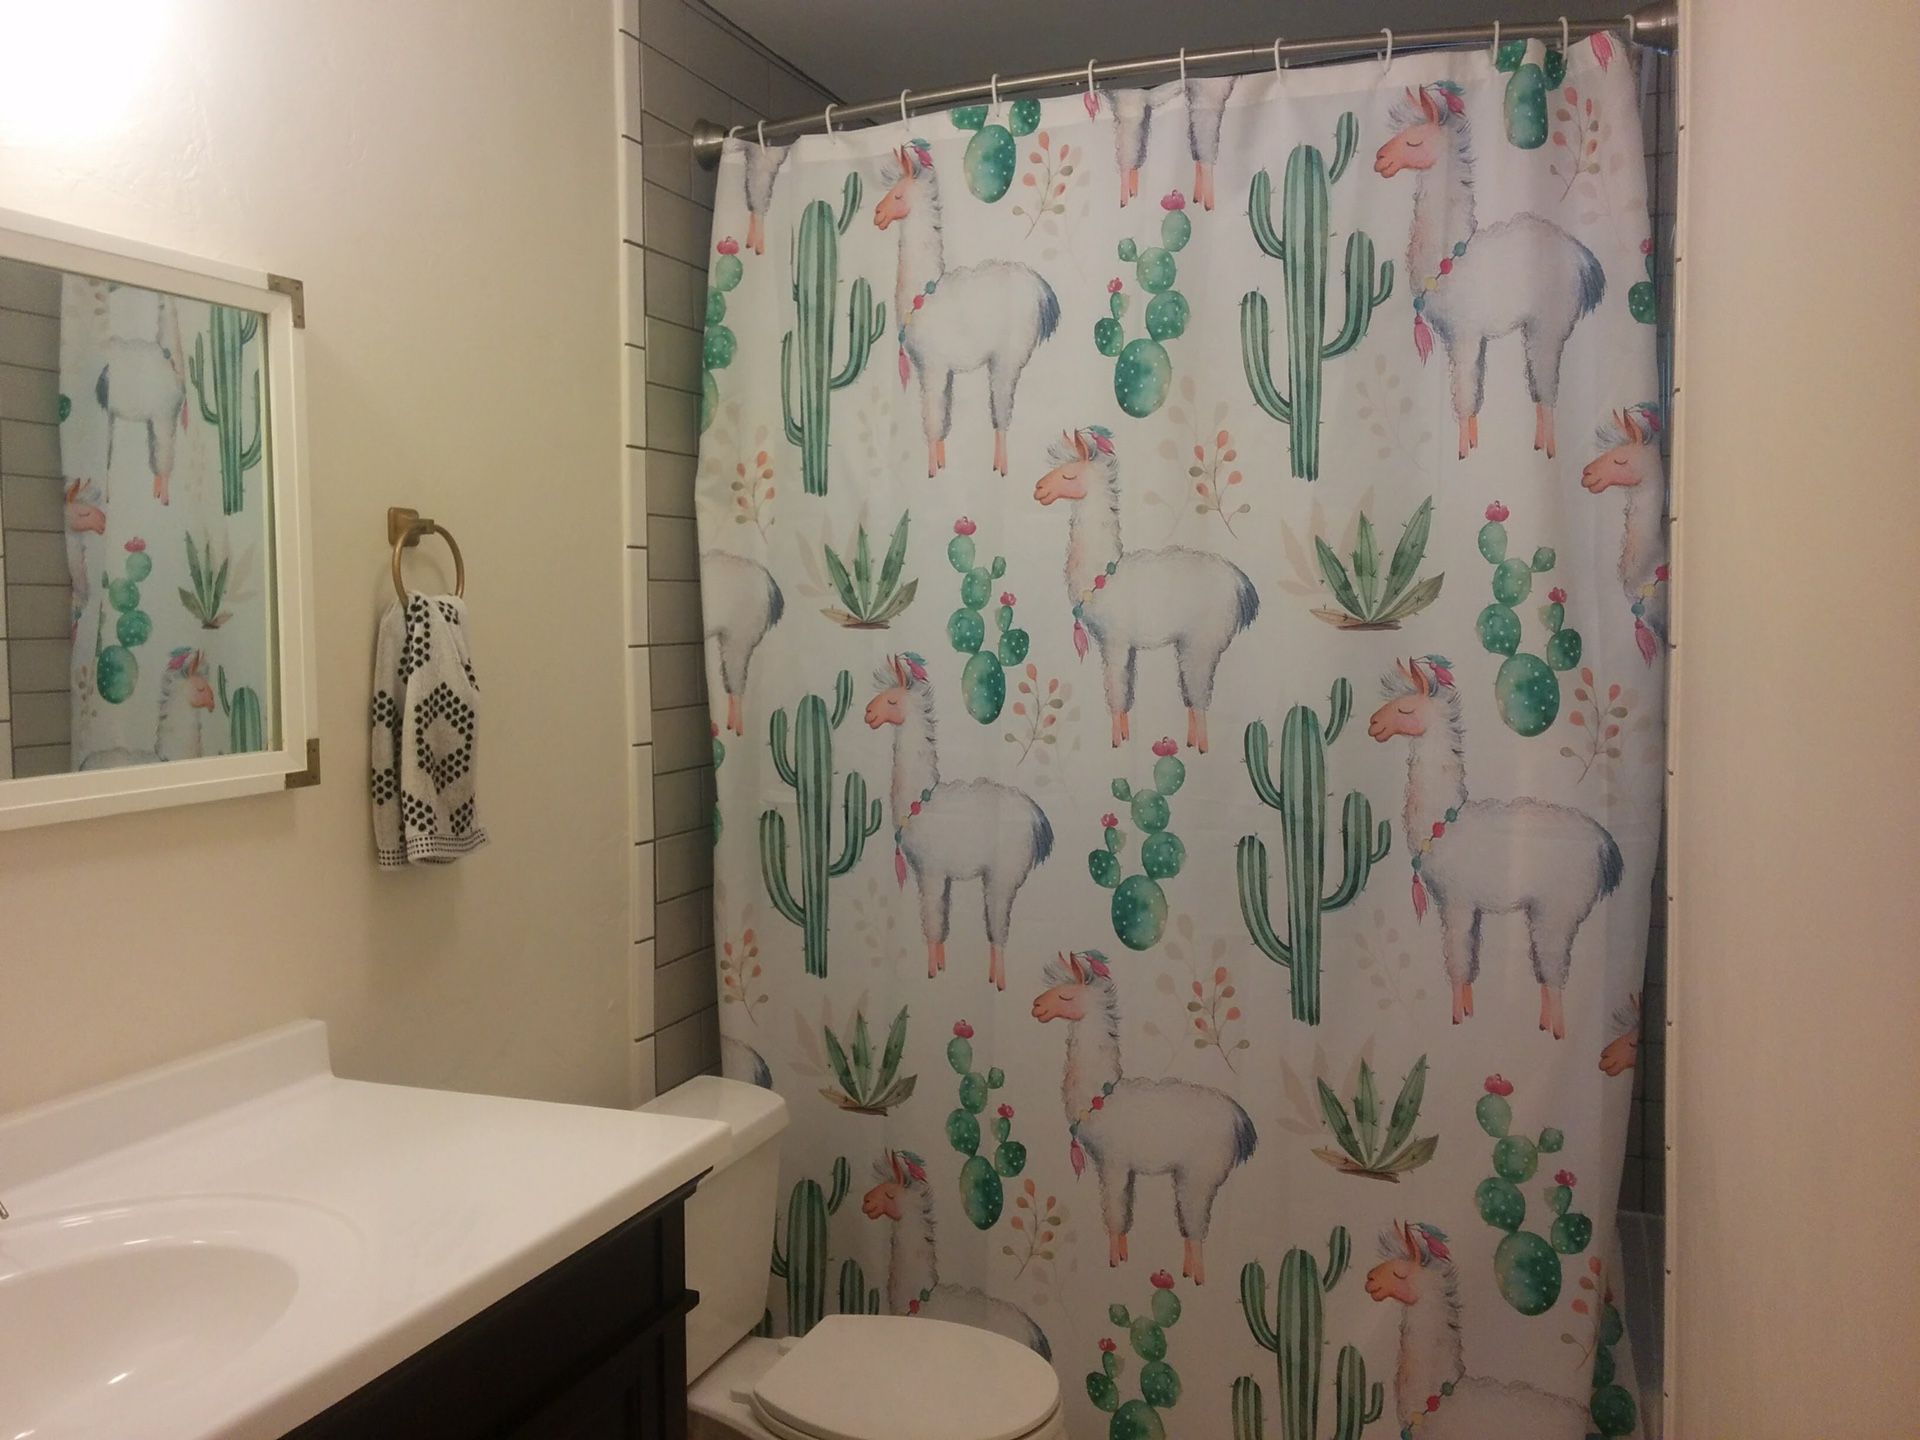 Cactus and Llama shower curtain with brand new liner